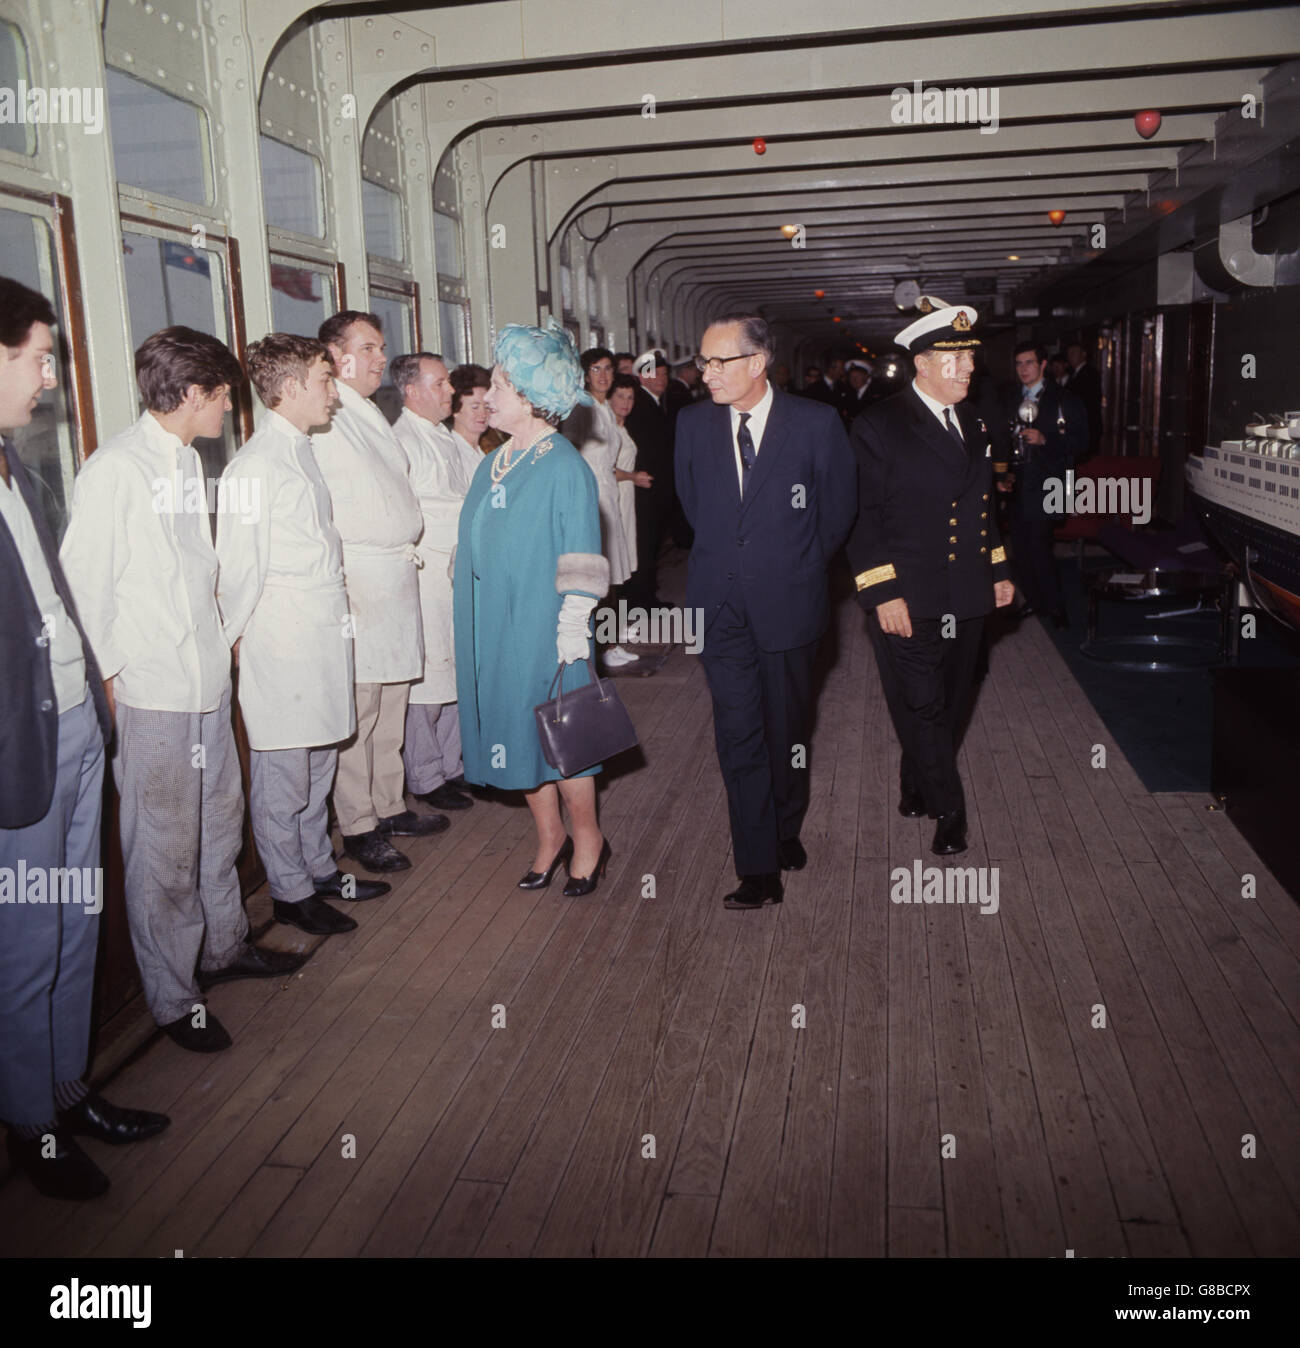 The Queen Mother meets members of the ship's complement during her farewell visit to the liner Queen Elizabeth at Southampton. With her are Sir Basil Smallpeice, Cunard Chairman, and captain Geoffrey Thrippleton Marr, Commodore. The liner will be retired and berthed in Florida. Stock Photo